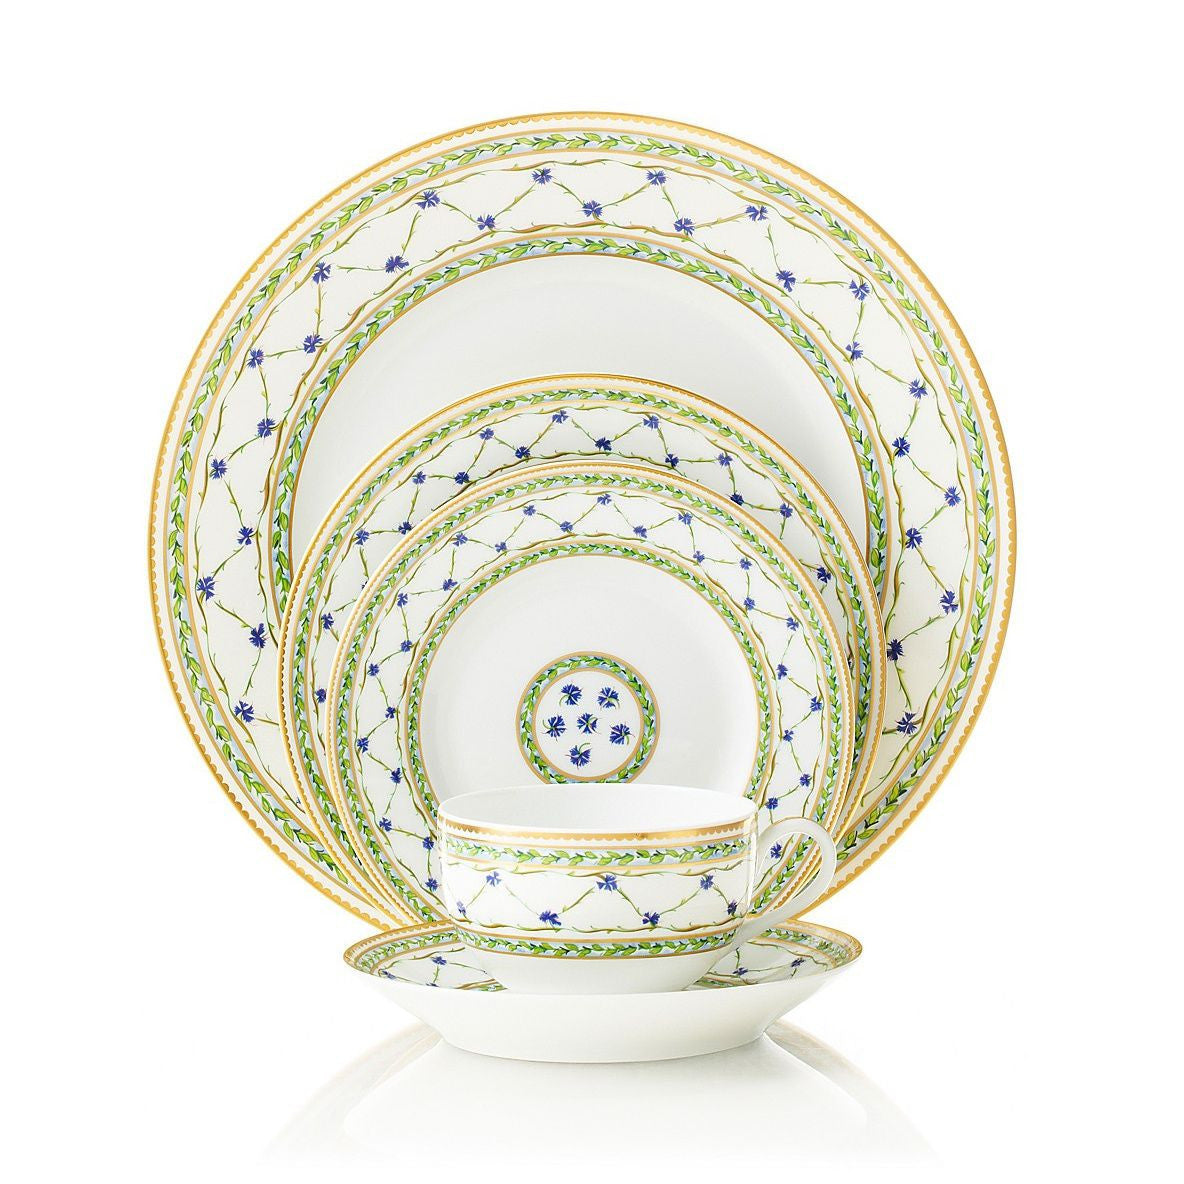 Raynaud's Allee Royale pattern of fine Limoges porcelain, including the round salad plate, is likely to become a treasured family heirloom. Decorated with blue and green floral festoons and a delicate gold band, it will invest any table with old world elegance.